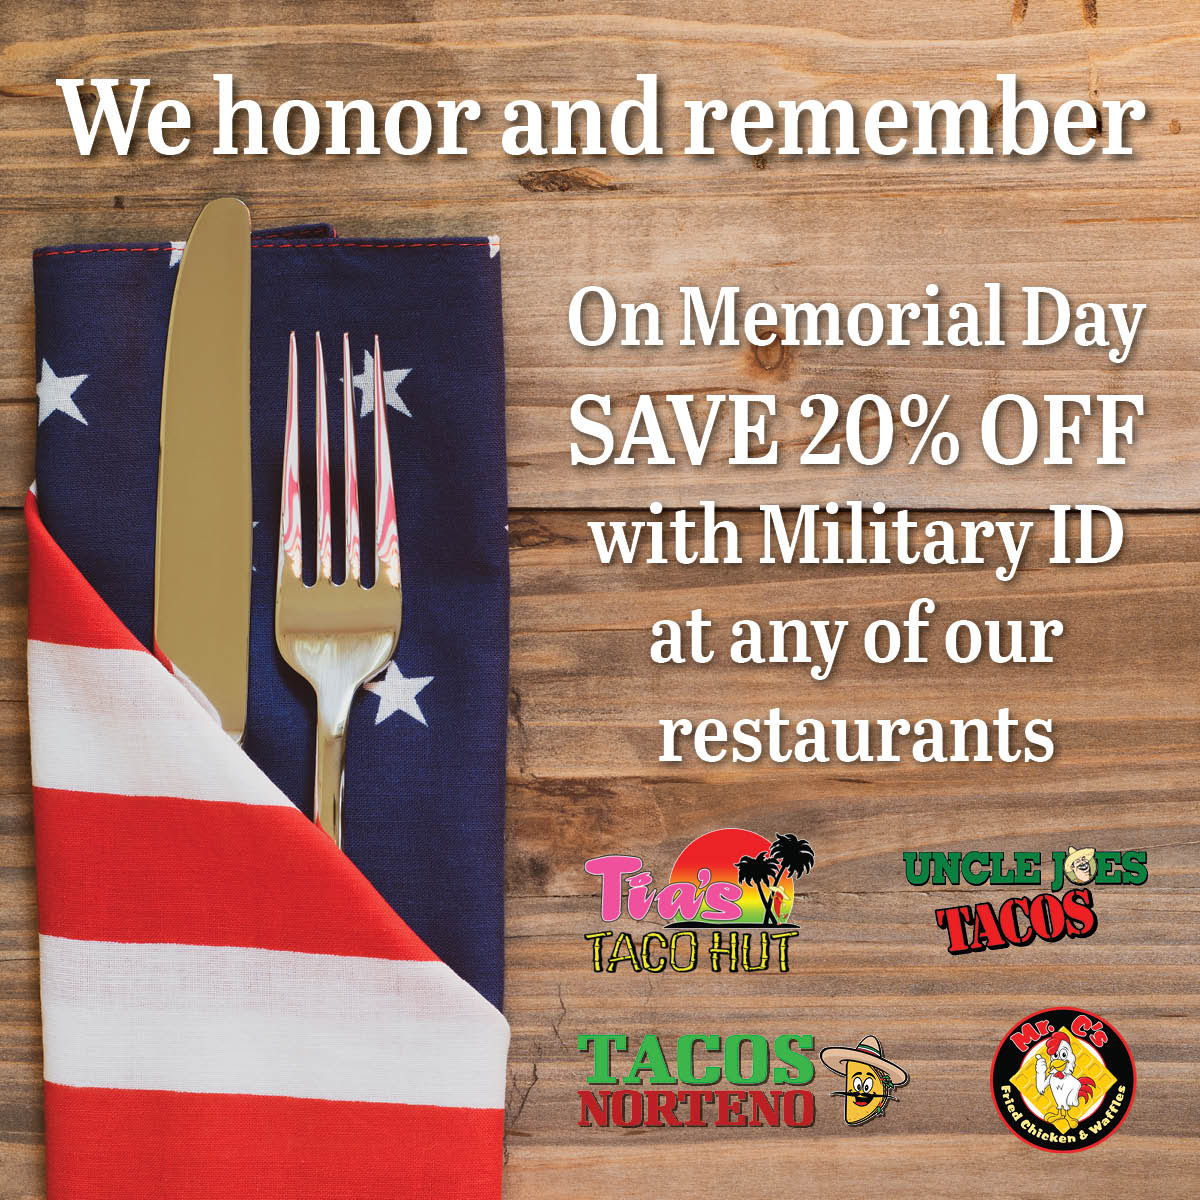 It’s an honor to serve those who serve. 🇺🇸 For Memorial Day, Uncle Joe’s will be offering 20% OFF tomorrow to those with a military ID.

#unclejoestacos #memorialday #mexicanfood #safoodie #safood #sanantoniofood #satxfood #safoodpics #eatlocalsa #sanantonioeats